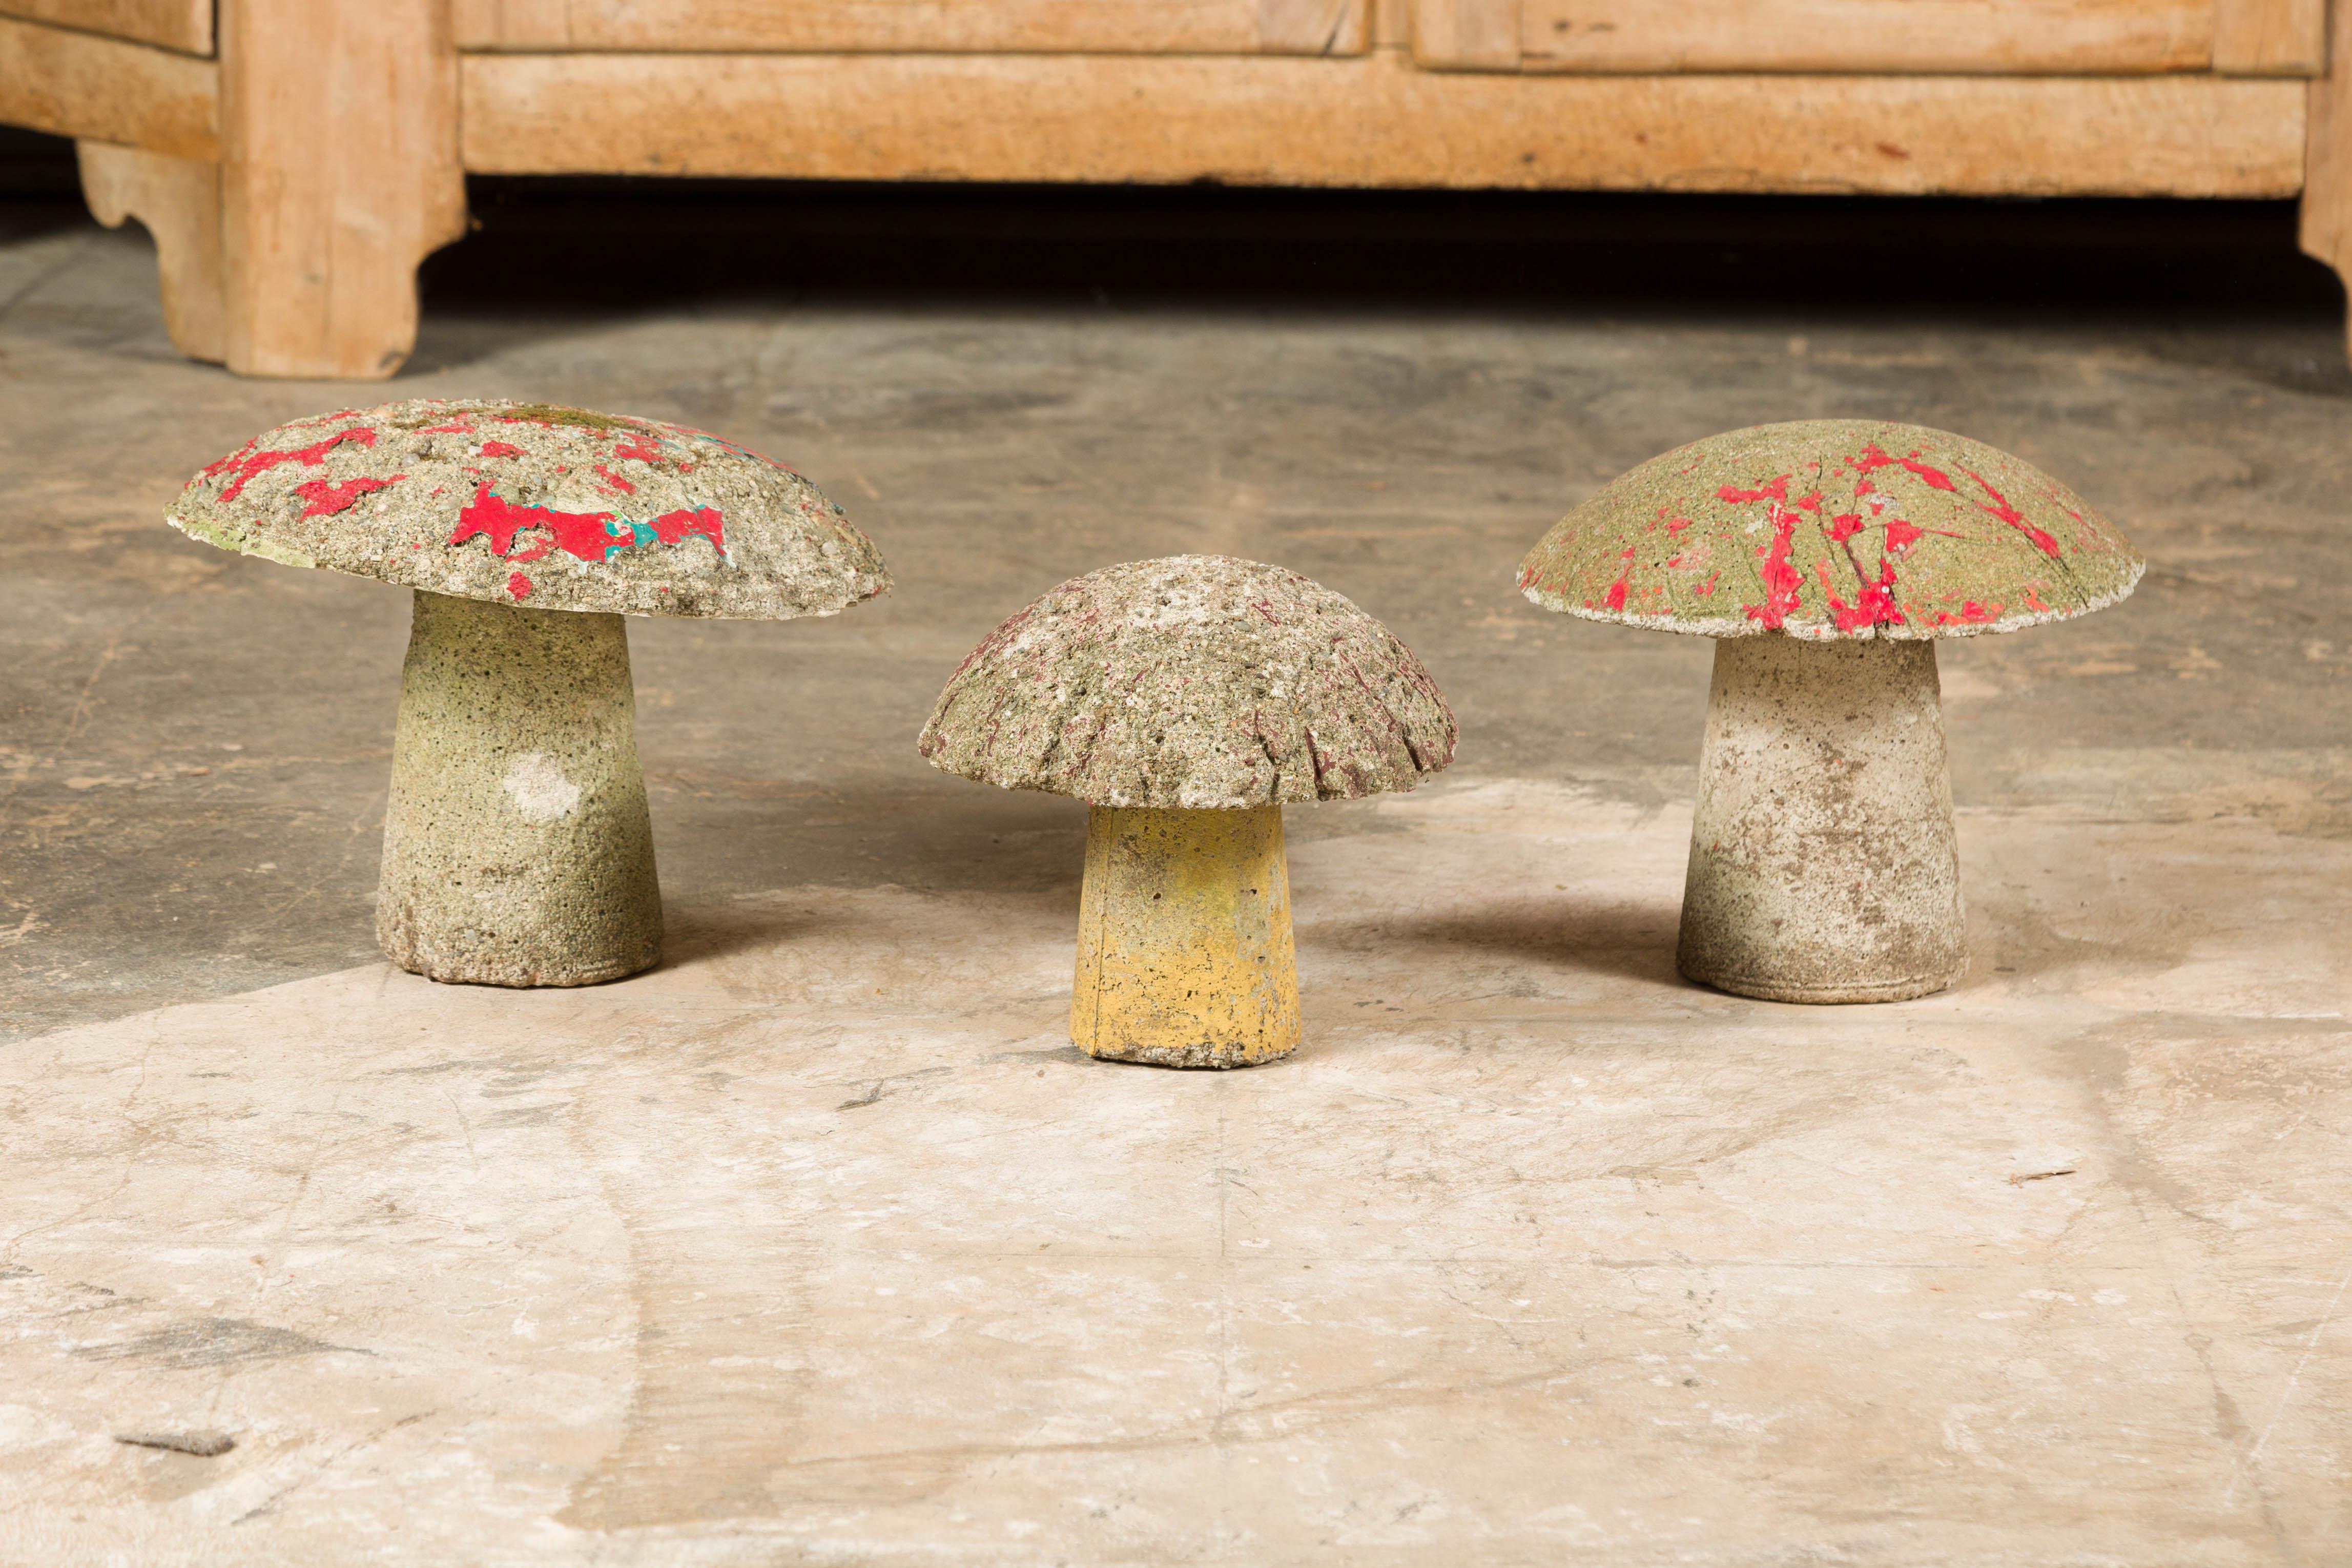 20th Century Set of Three American Midcentury Painted Concrete Mushroom Garden Ornaments For Sale